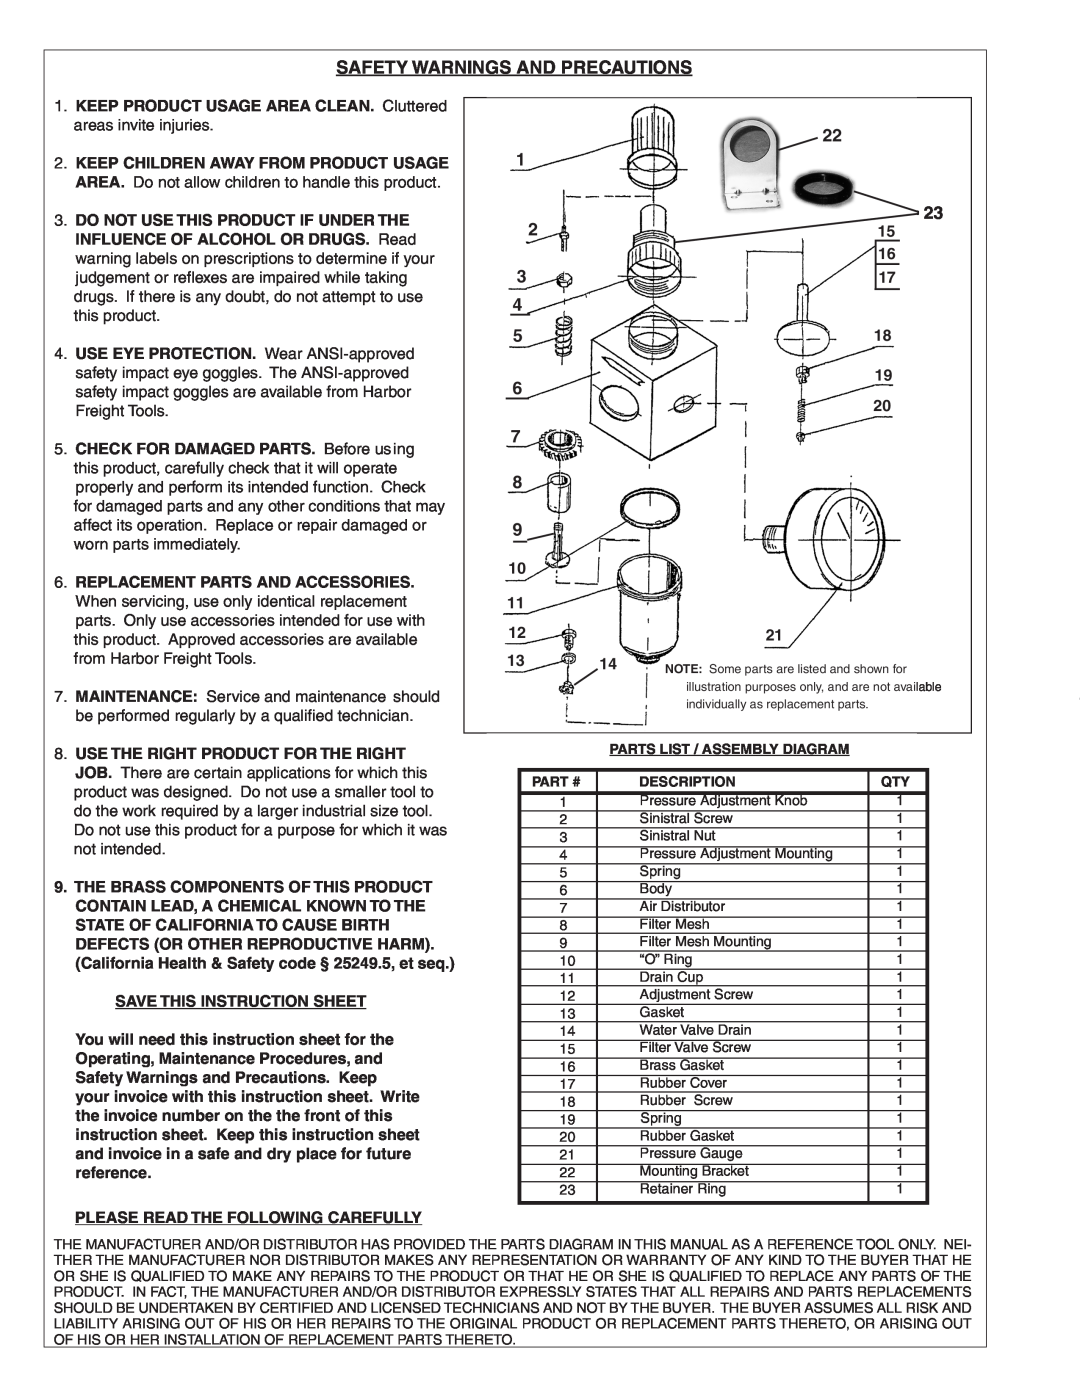 Harbor Freight Tools 43242 instruction sheet Safety Warnings And Precautions 